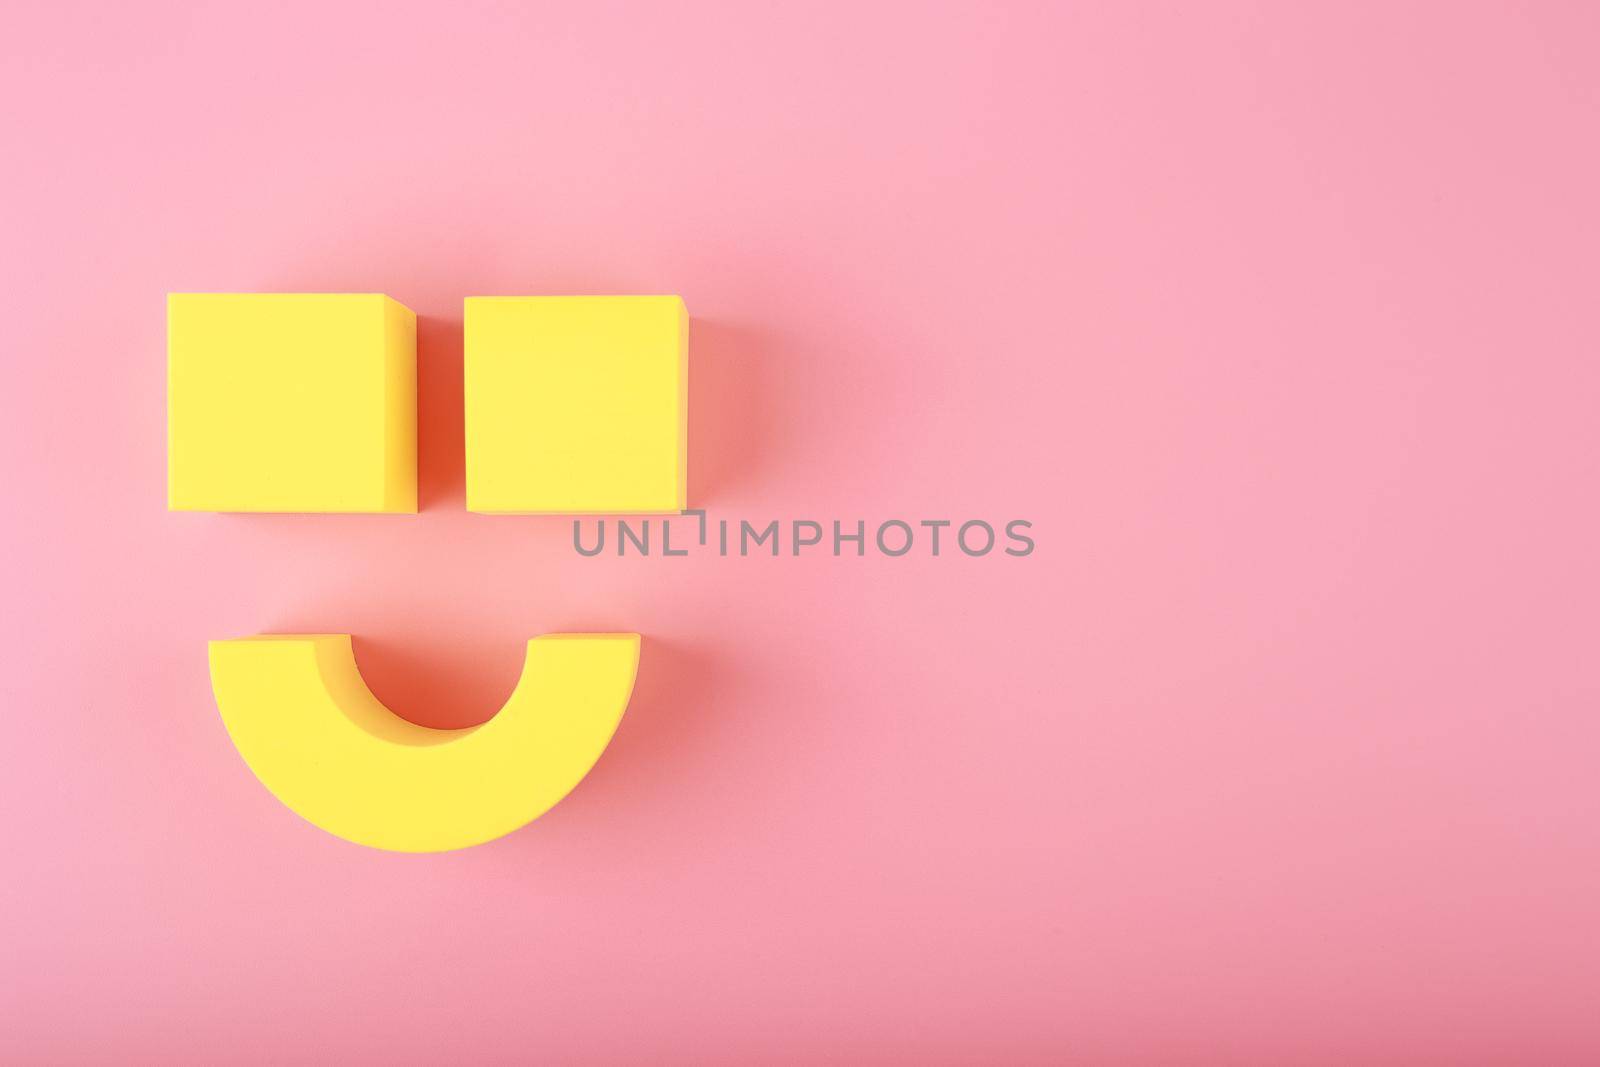 Creative flat lay with yellow happy smile symbol made of figures on pink background with copy space. Concept of Smile day, emotions, emoji or mental health